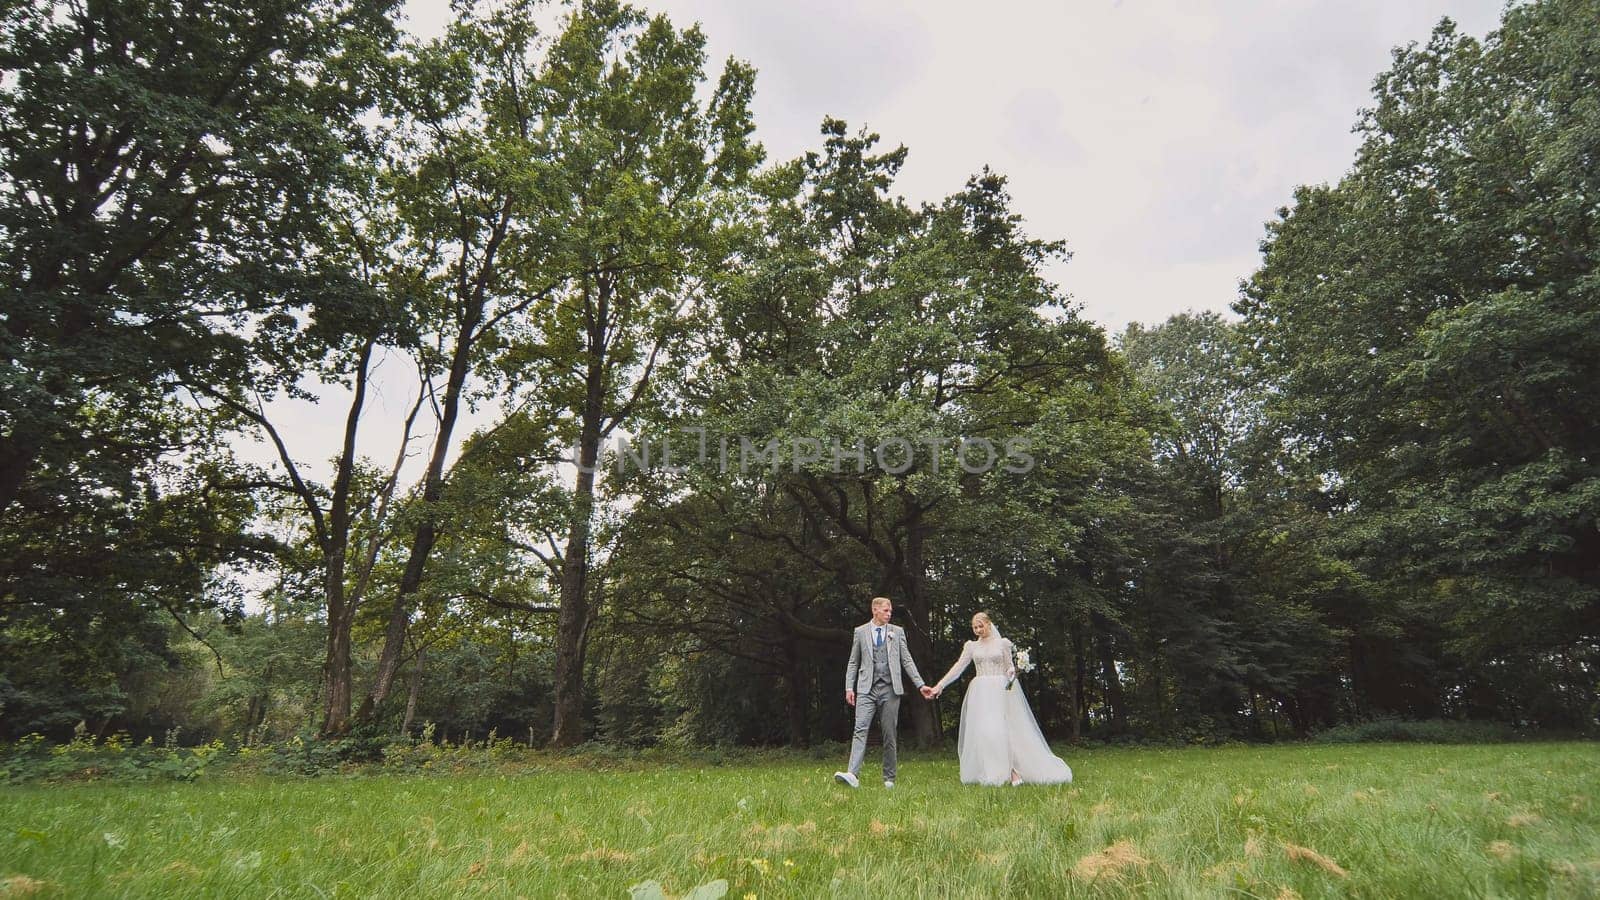 The bride and groom walk against a backdrop of dense trees. by DovidPro